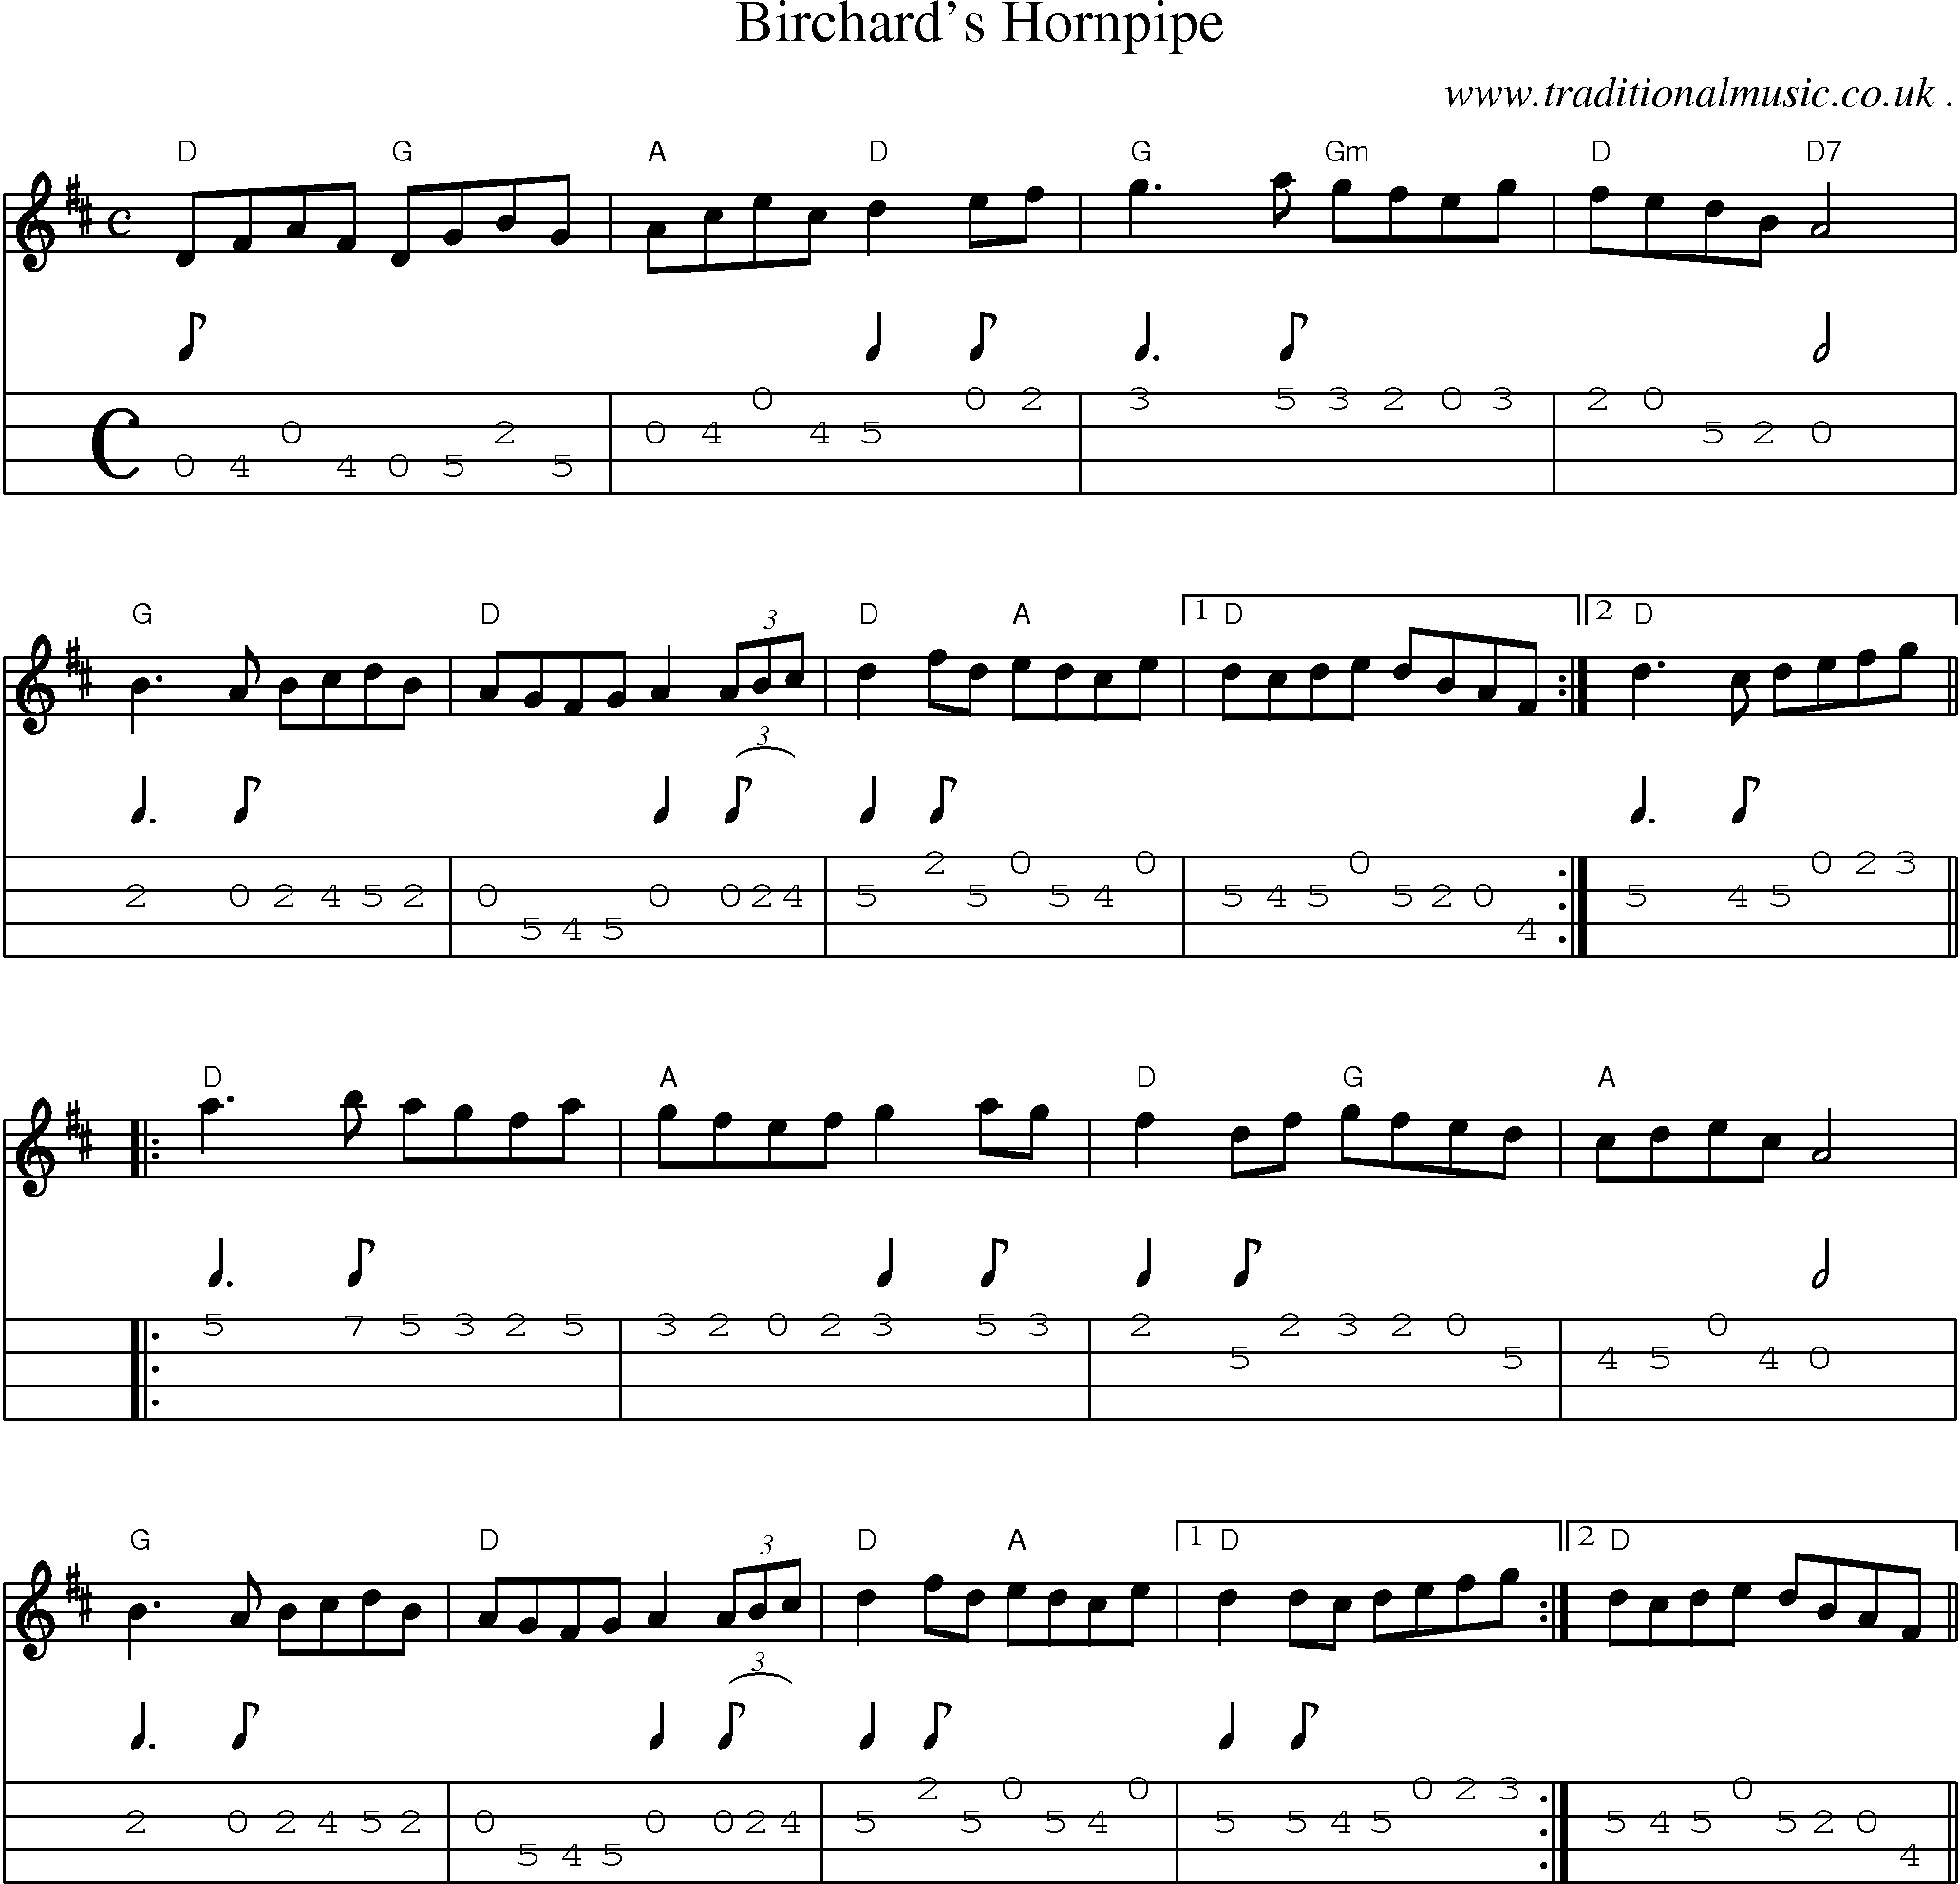 Music Score and Guitar Tabs for Birchards Hornpipe